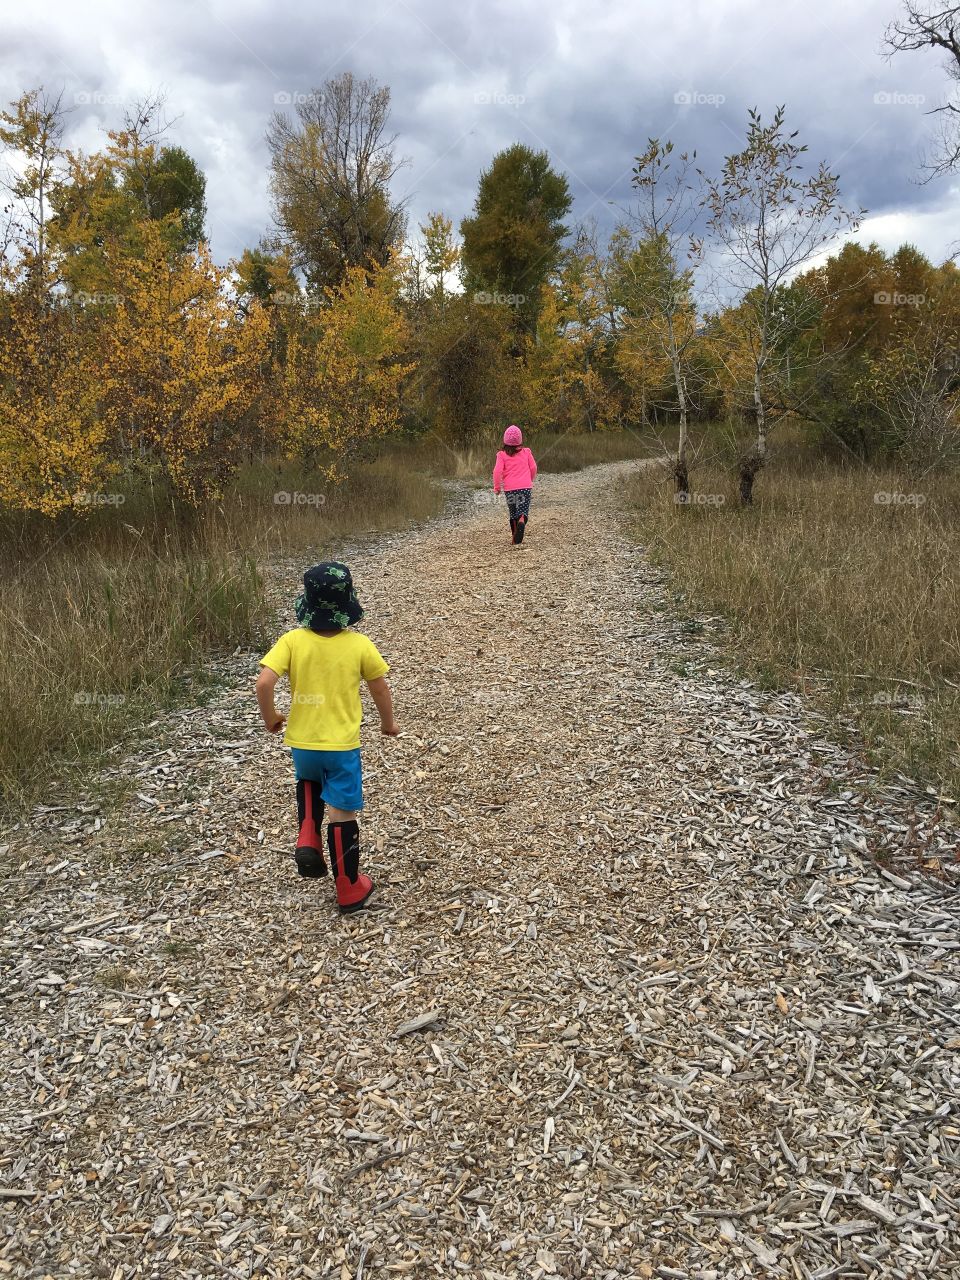 A special hike with some special kids